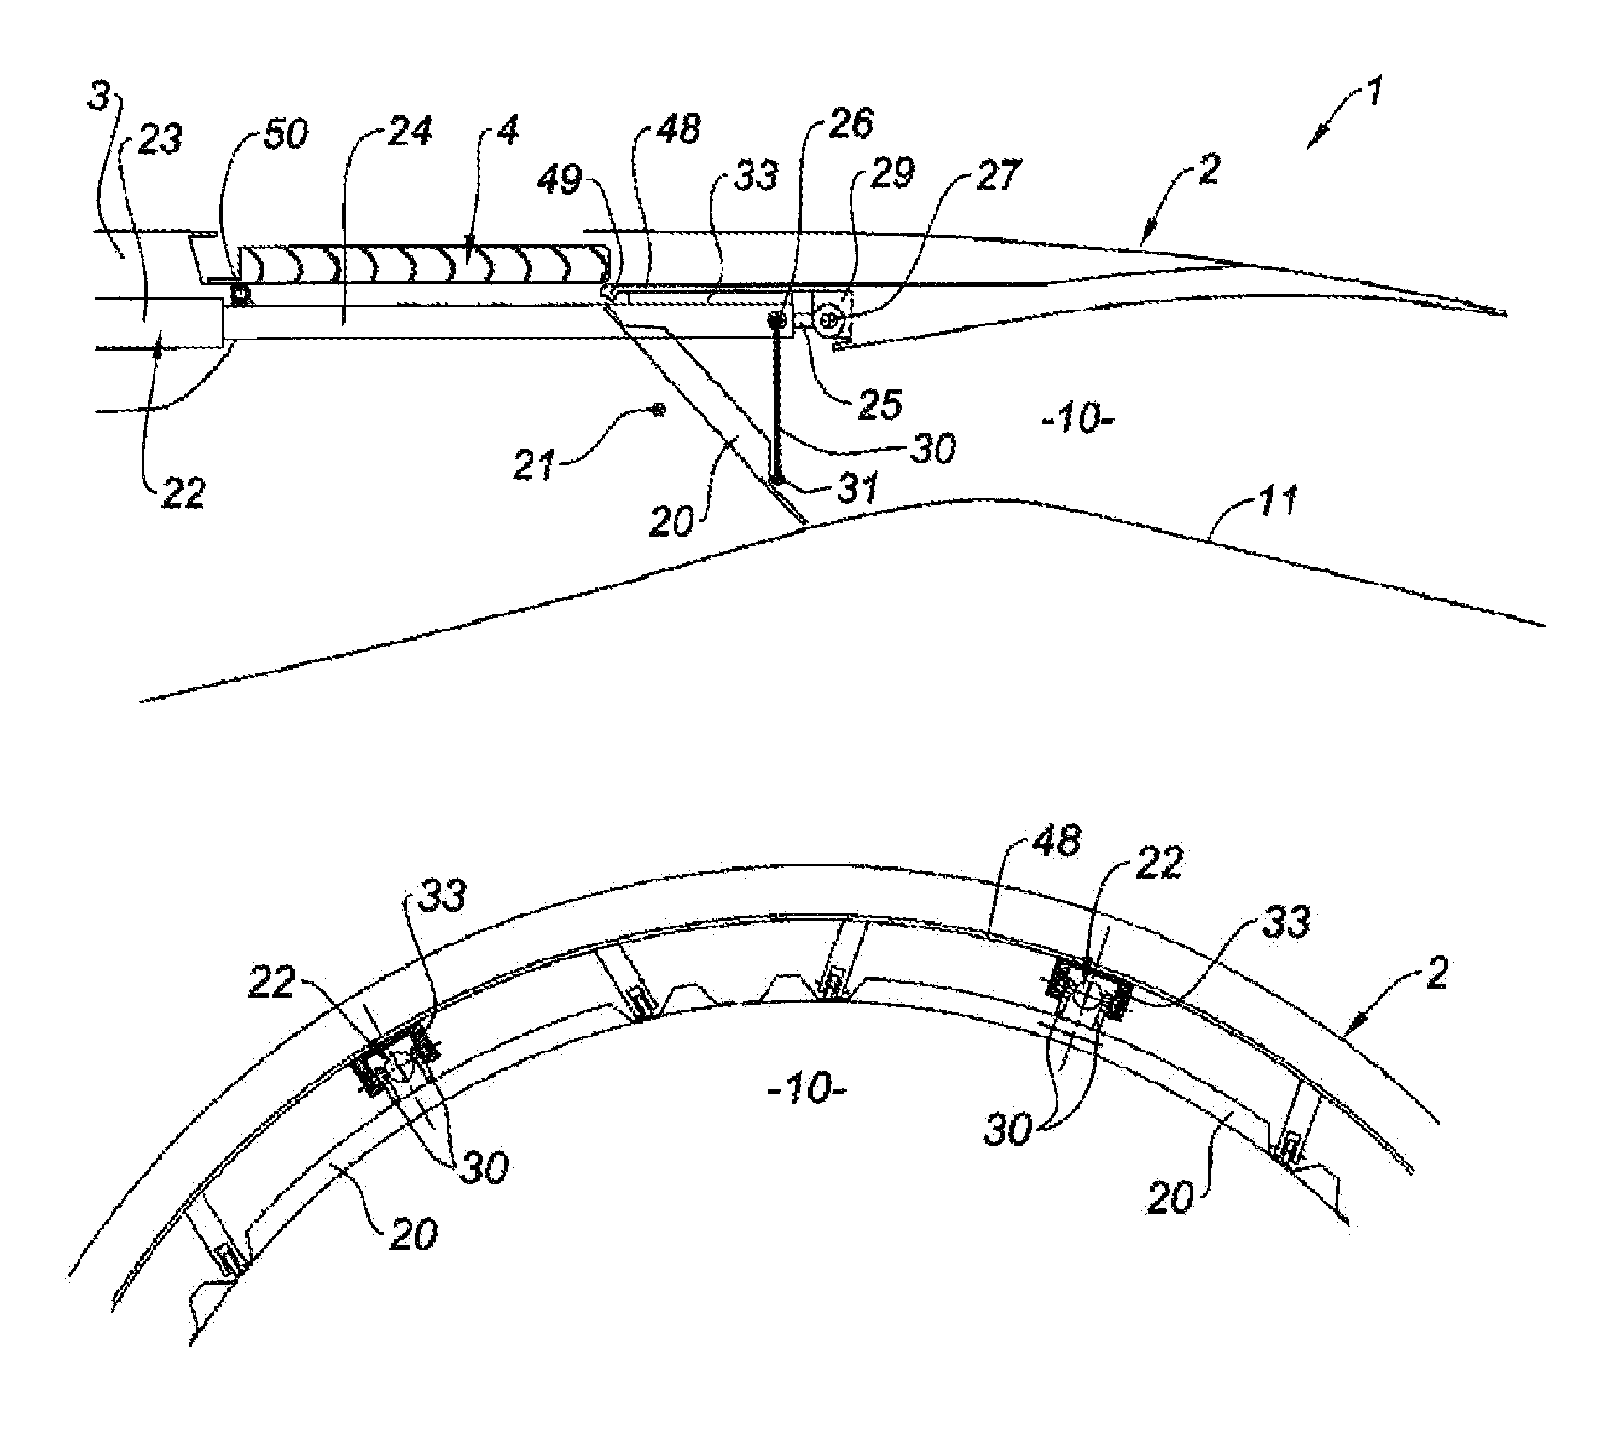 Thrust reverser for a dual-flow turbine engine nacelle